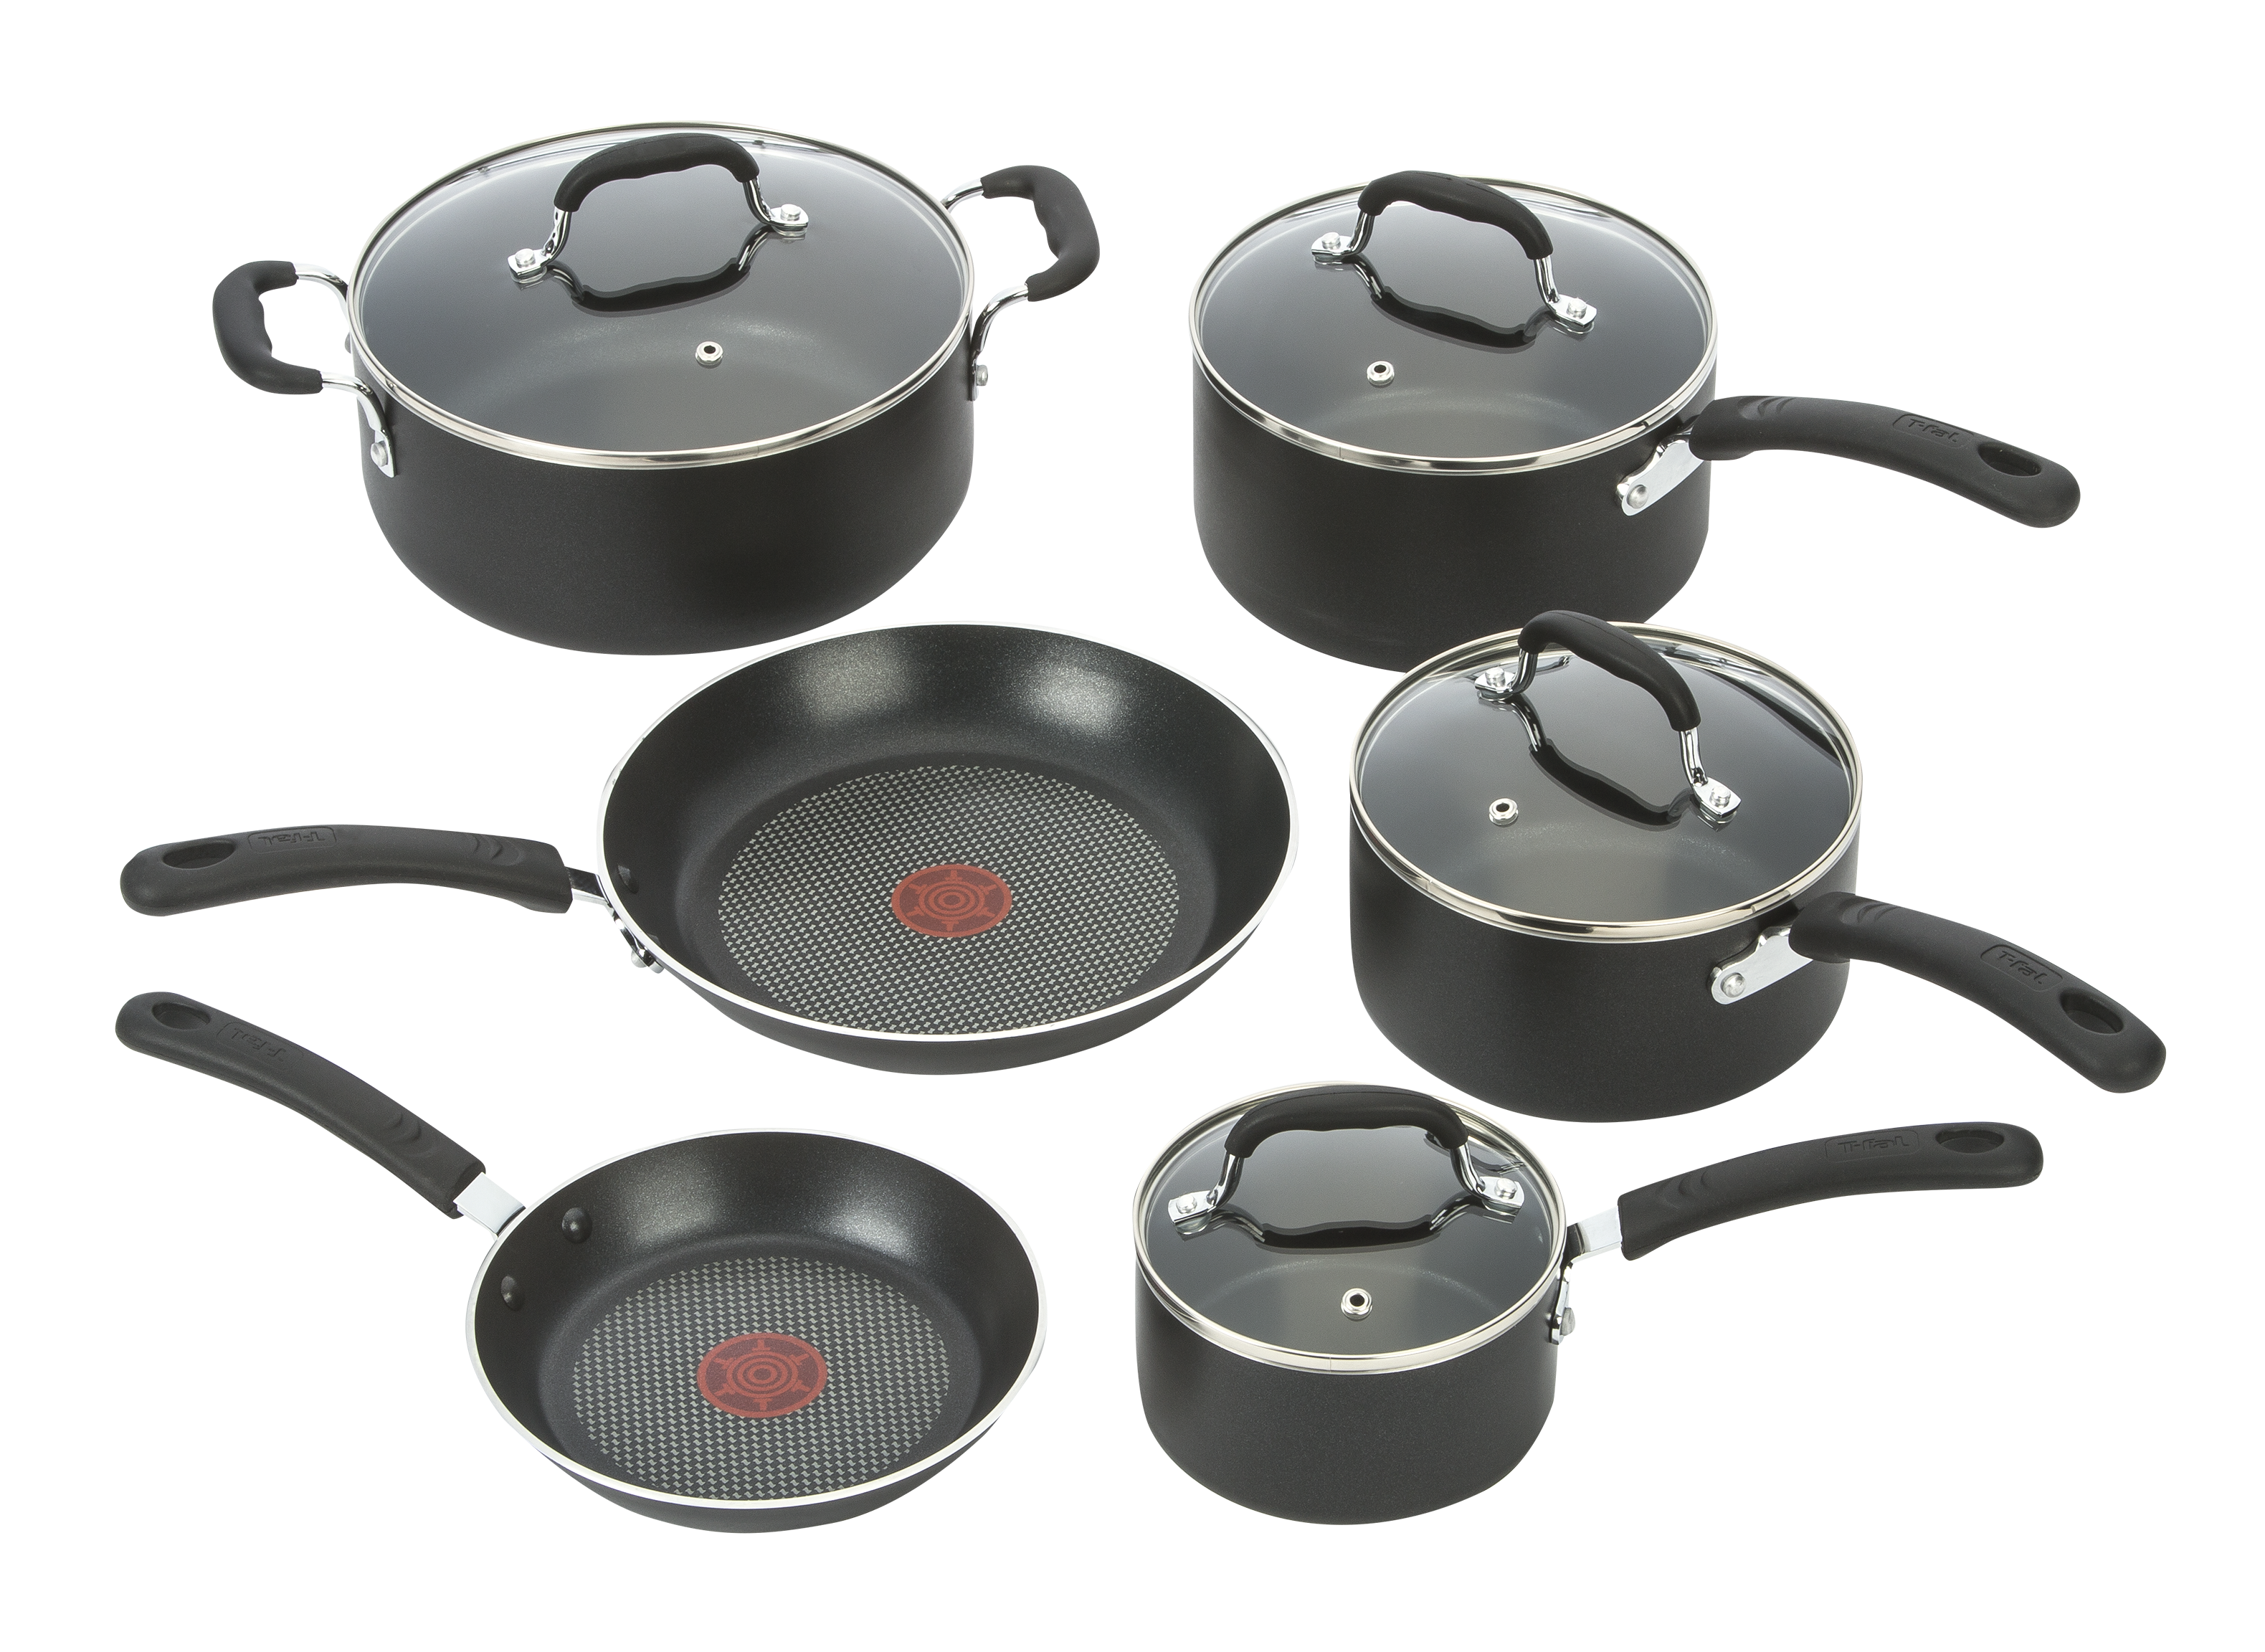 https://crdms.images.consumerreports.org/prod/products/cr/models/387286-cookware-tfal-professionaltotalnonstick10pce938sa74.png